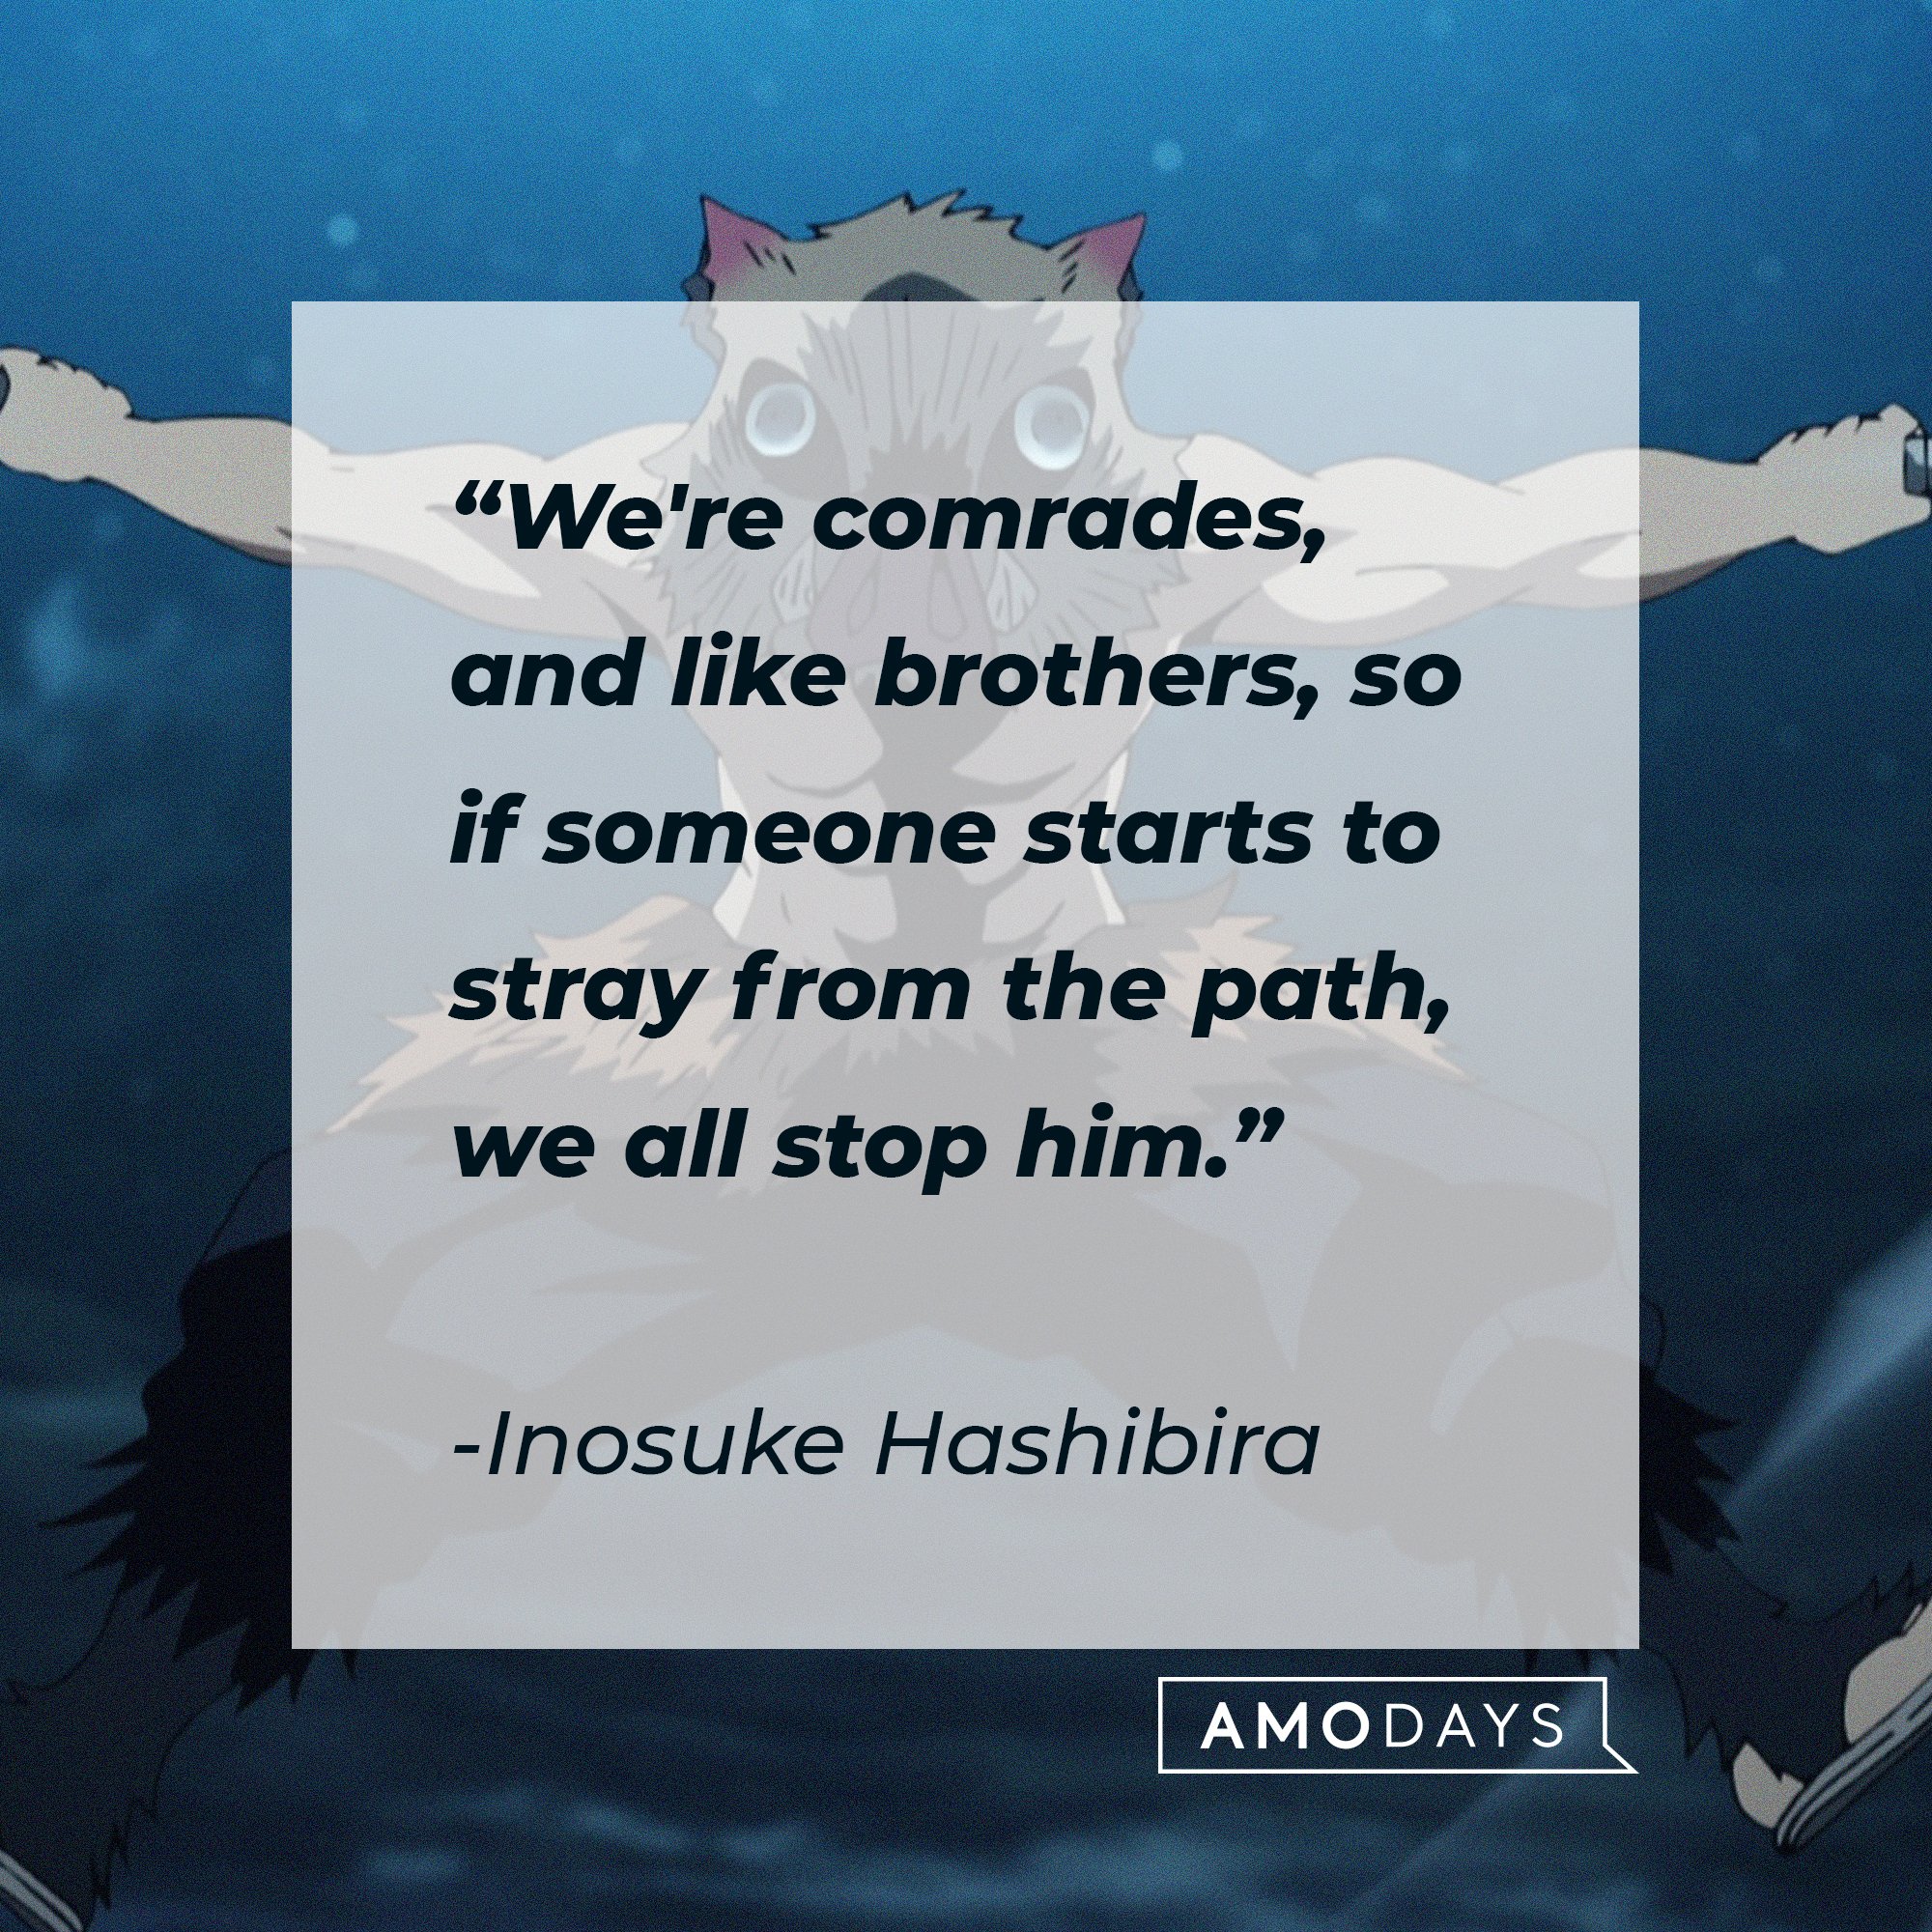 Inosuke Hashibira’s quote: "We're comrades, and like brothers, so if someone starts to stray from the path, we all stop him." | Image: AmoDays